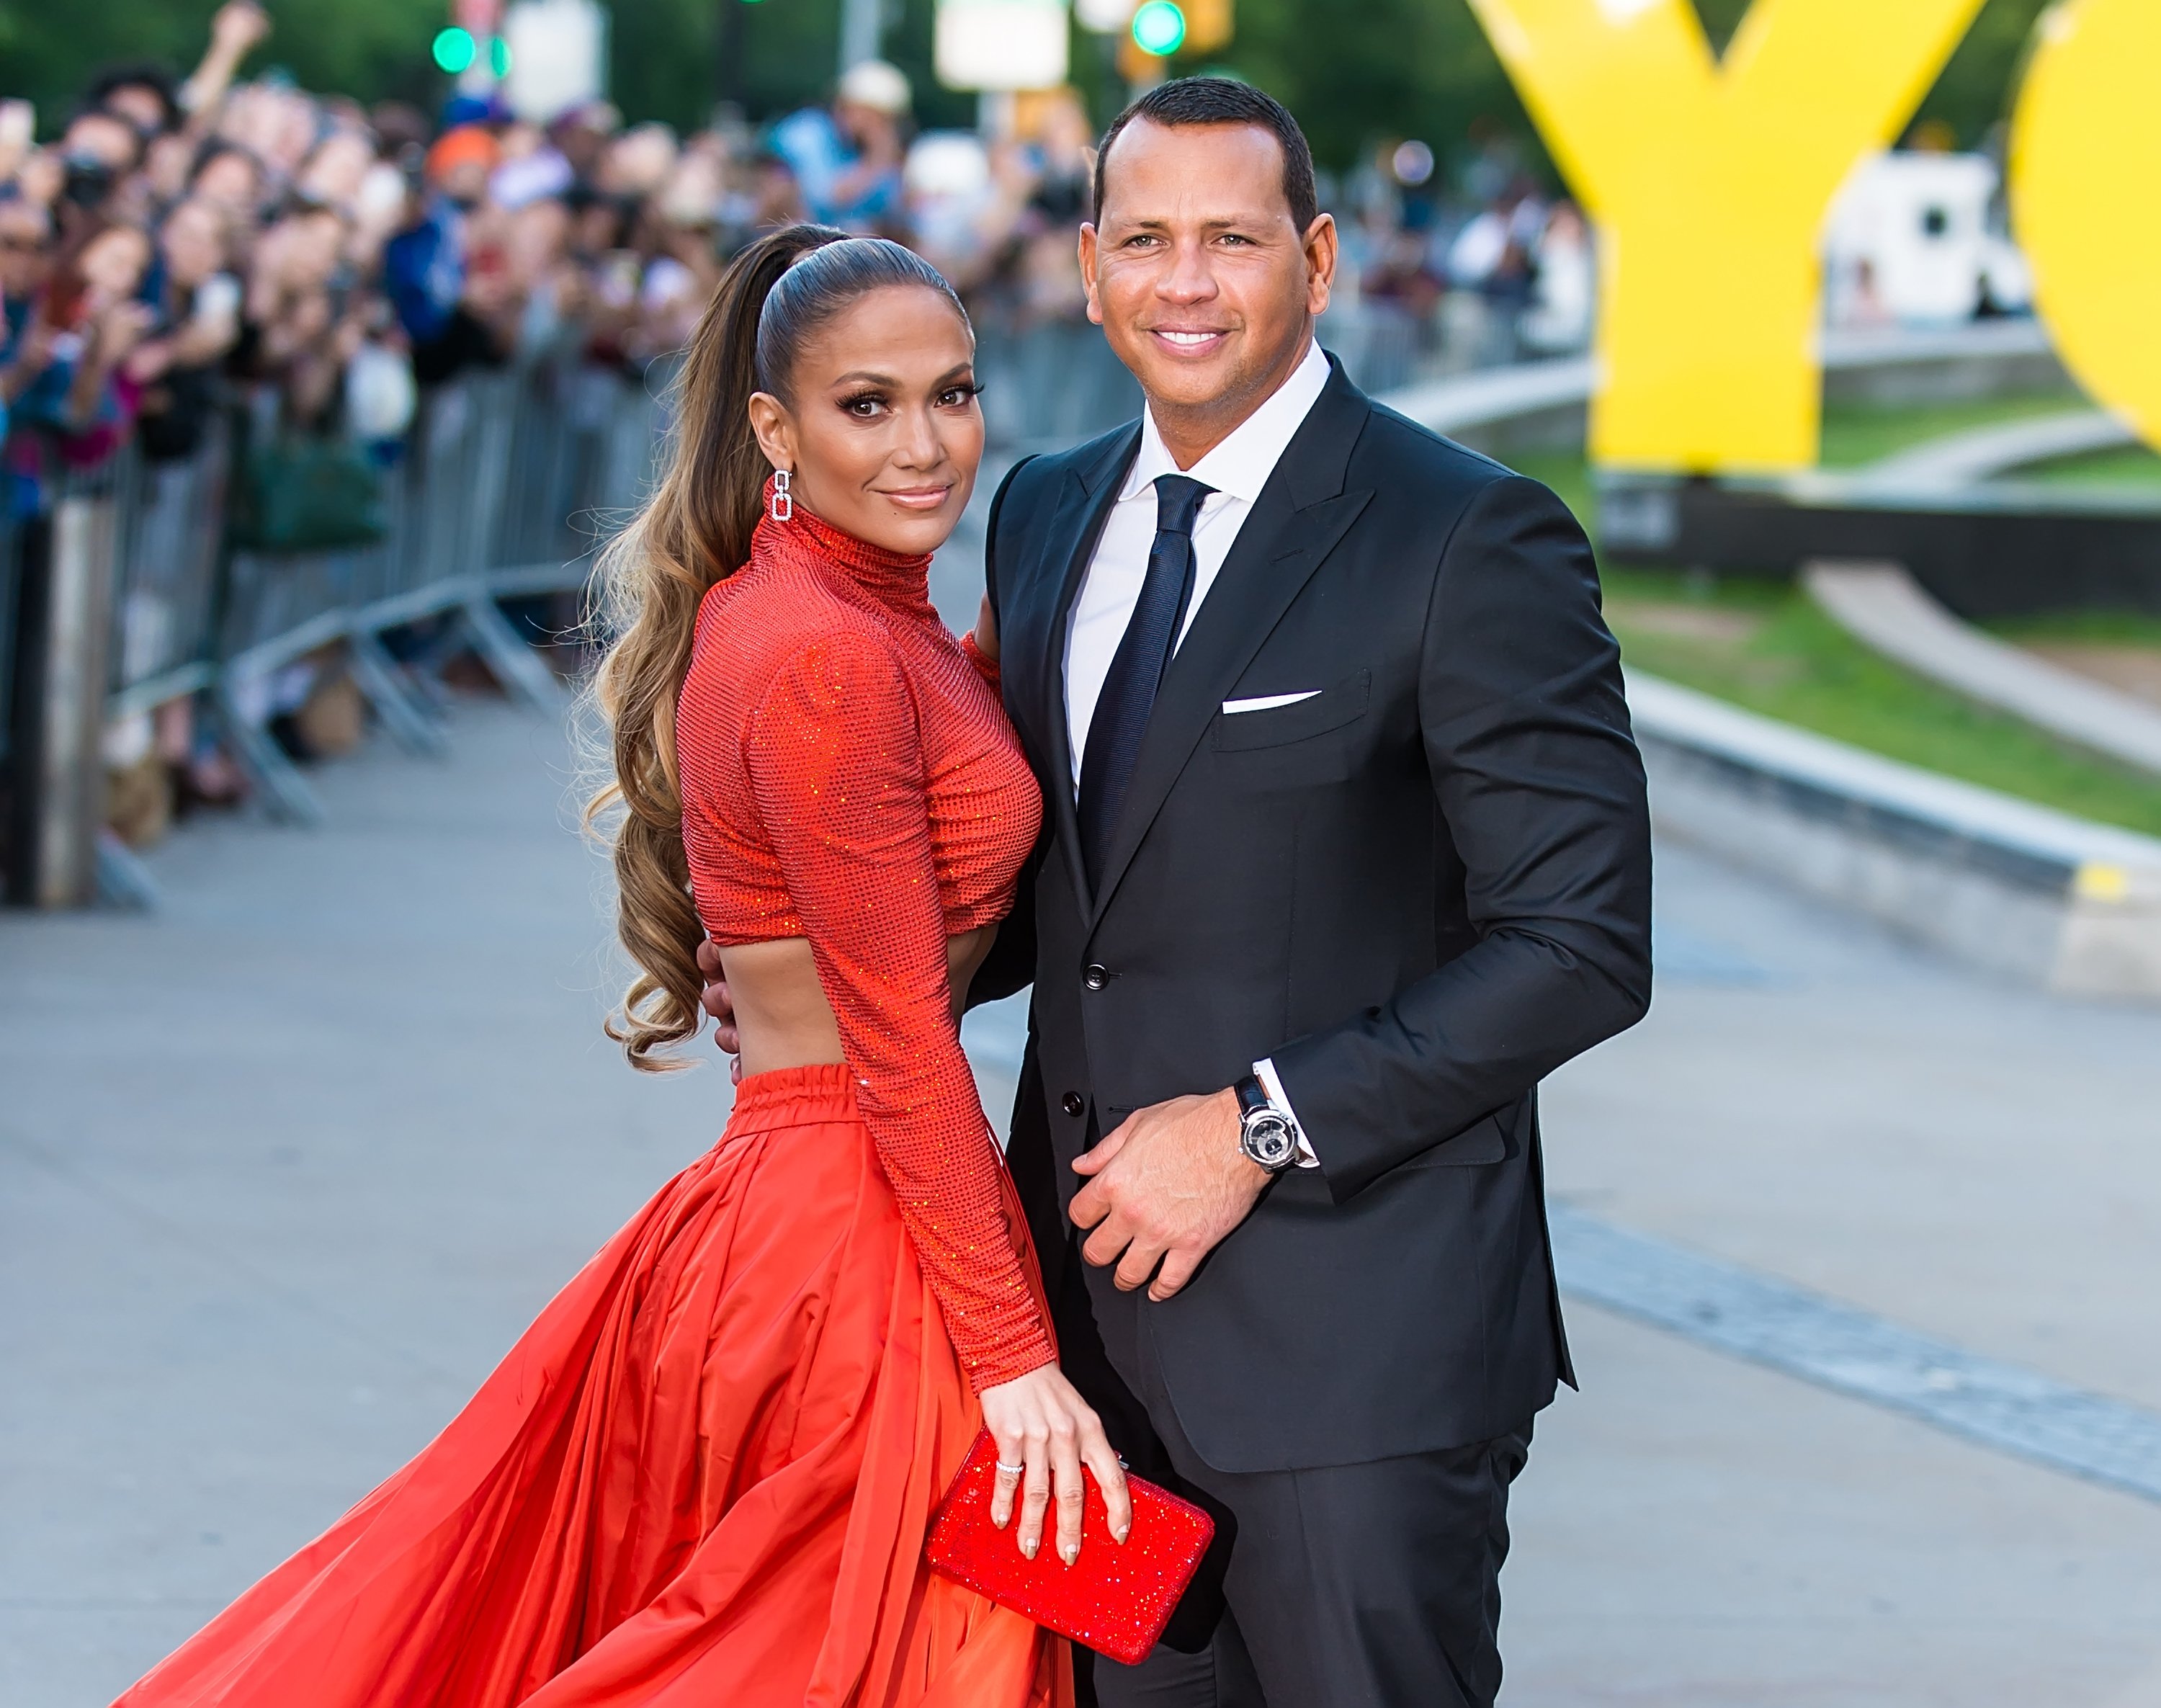 Jennifer Lopez and Alex Rodriguez pictured at the 2019 CFDA Fashion Awards. New York City. | Photo: Getty Images